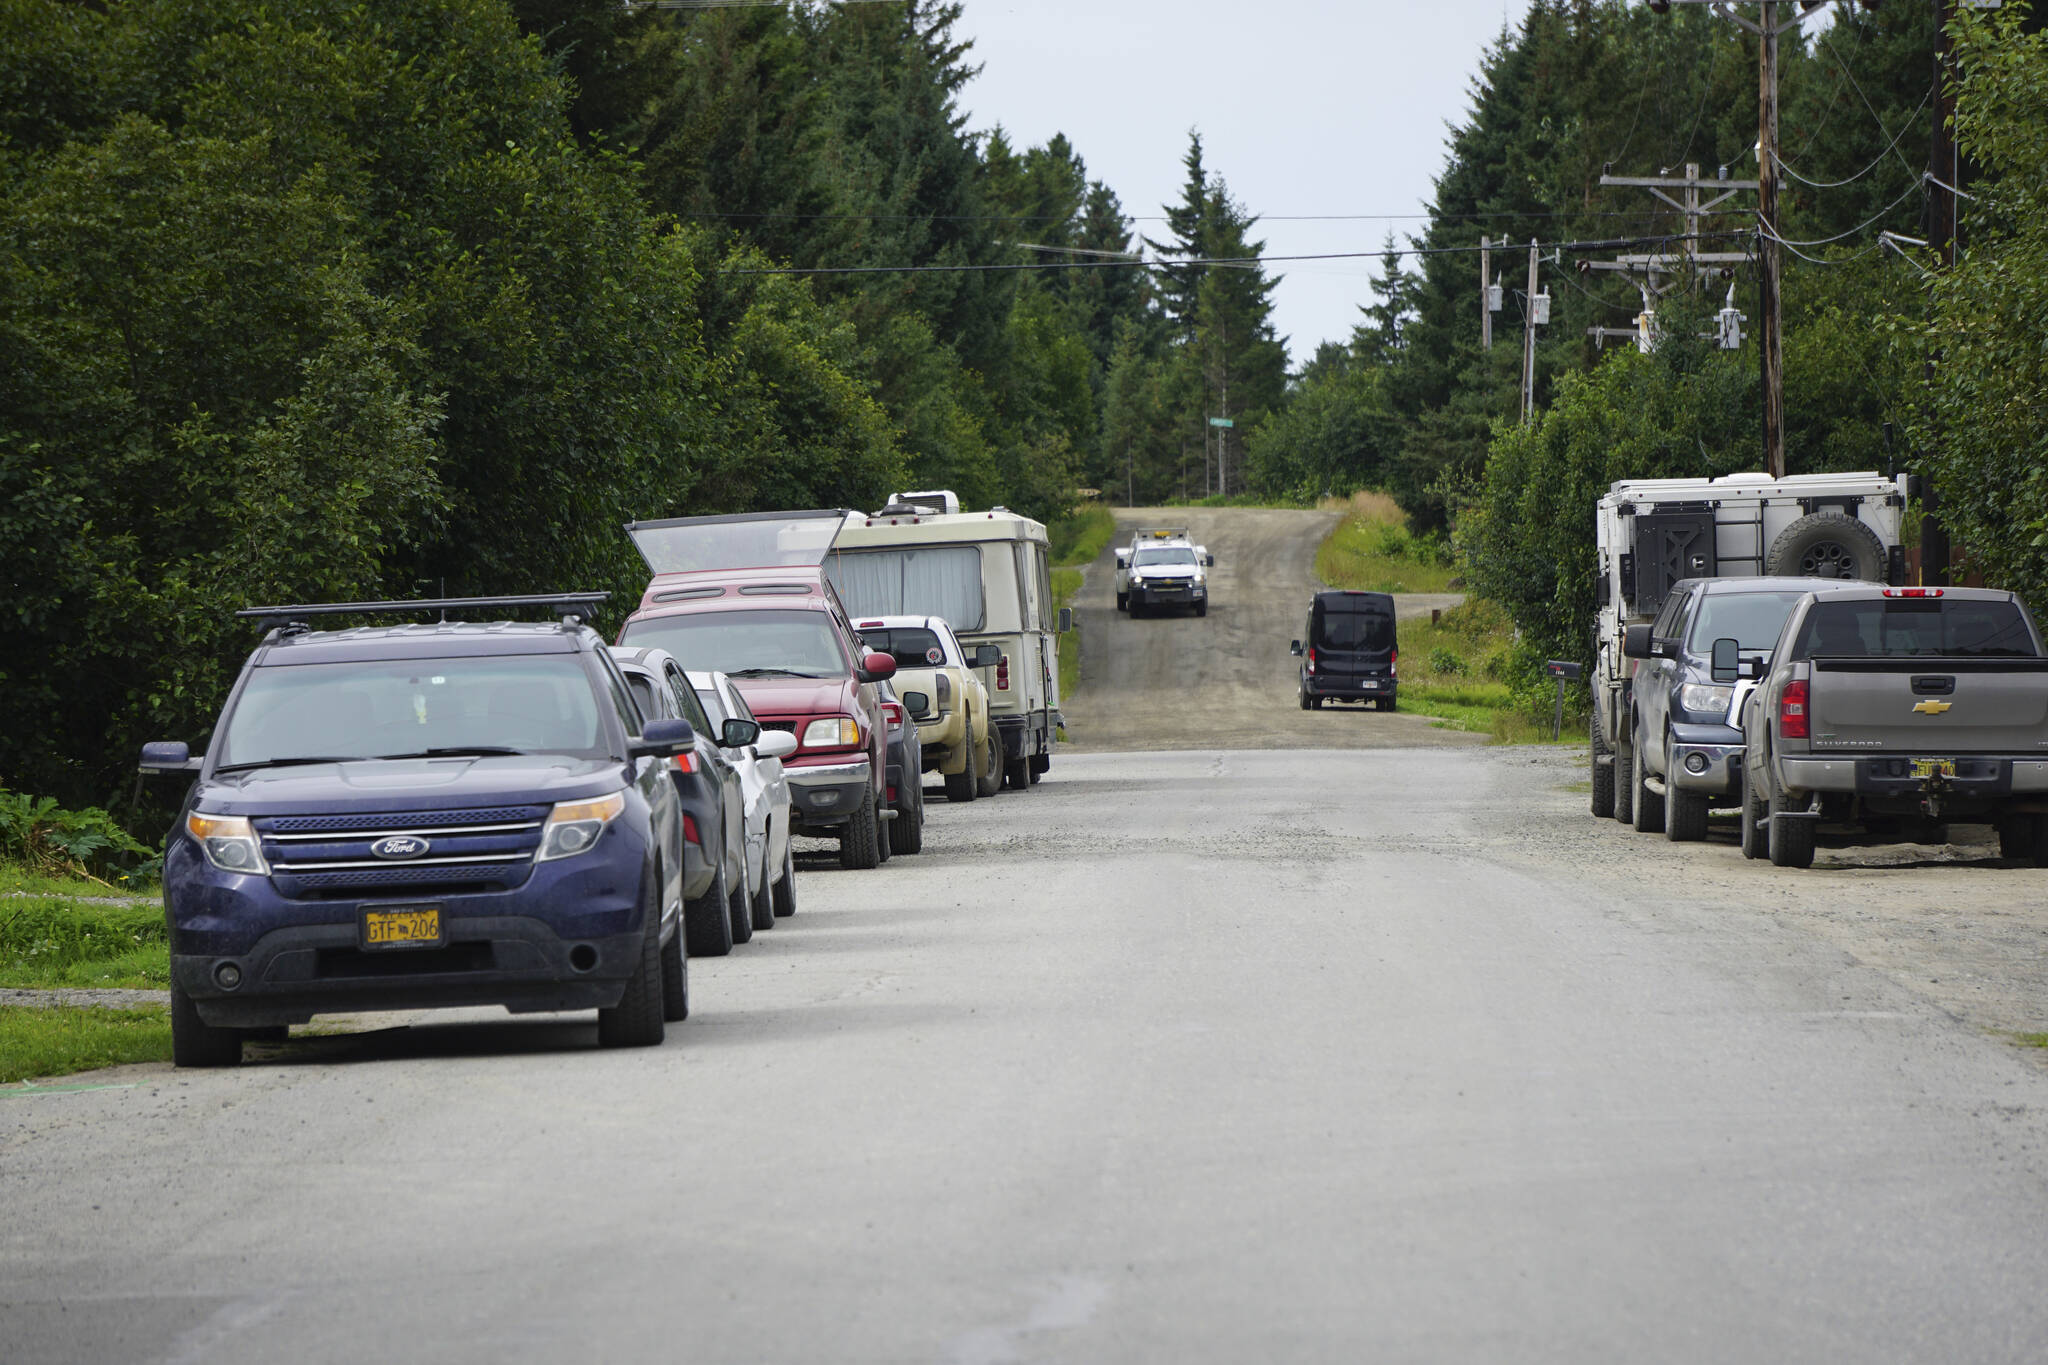 Vehicles are parked in or near the road on Thursday, Aug. 4, 2022, on Lakeshore Drive in Homer, Alaska. An ordinance passed by the Homer City Council on Monday, Aug. 8, 2022, made it unlawful to push snow into roads and city right-of-ways and to park vehices or leave other objects that interfere with snow removal or road maintenance in city roads, paths, sidewalks or drainage ways or structures. (Photo by Michael Armstrong/Homer News)